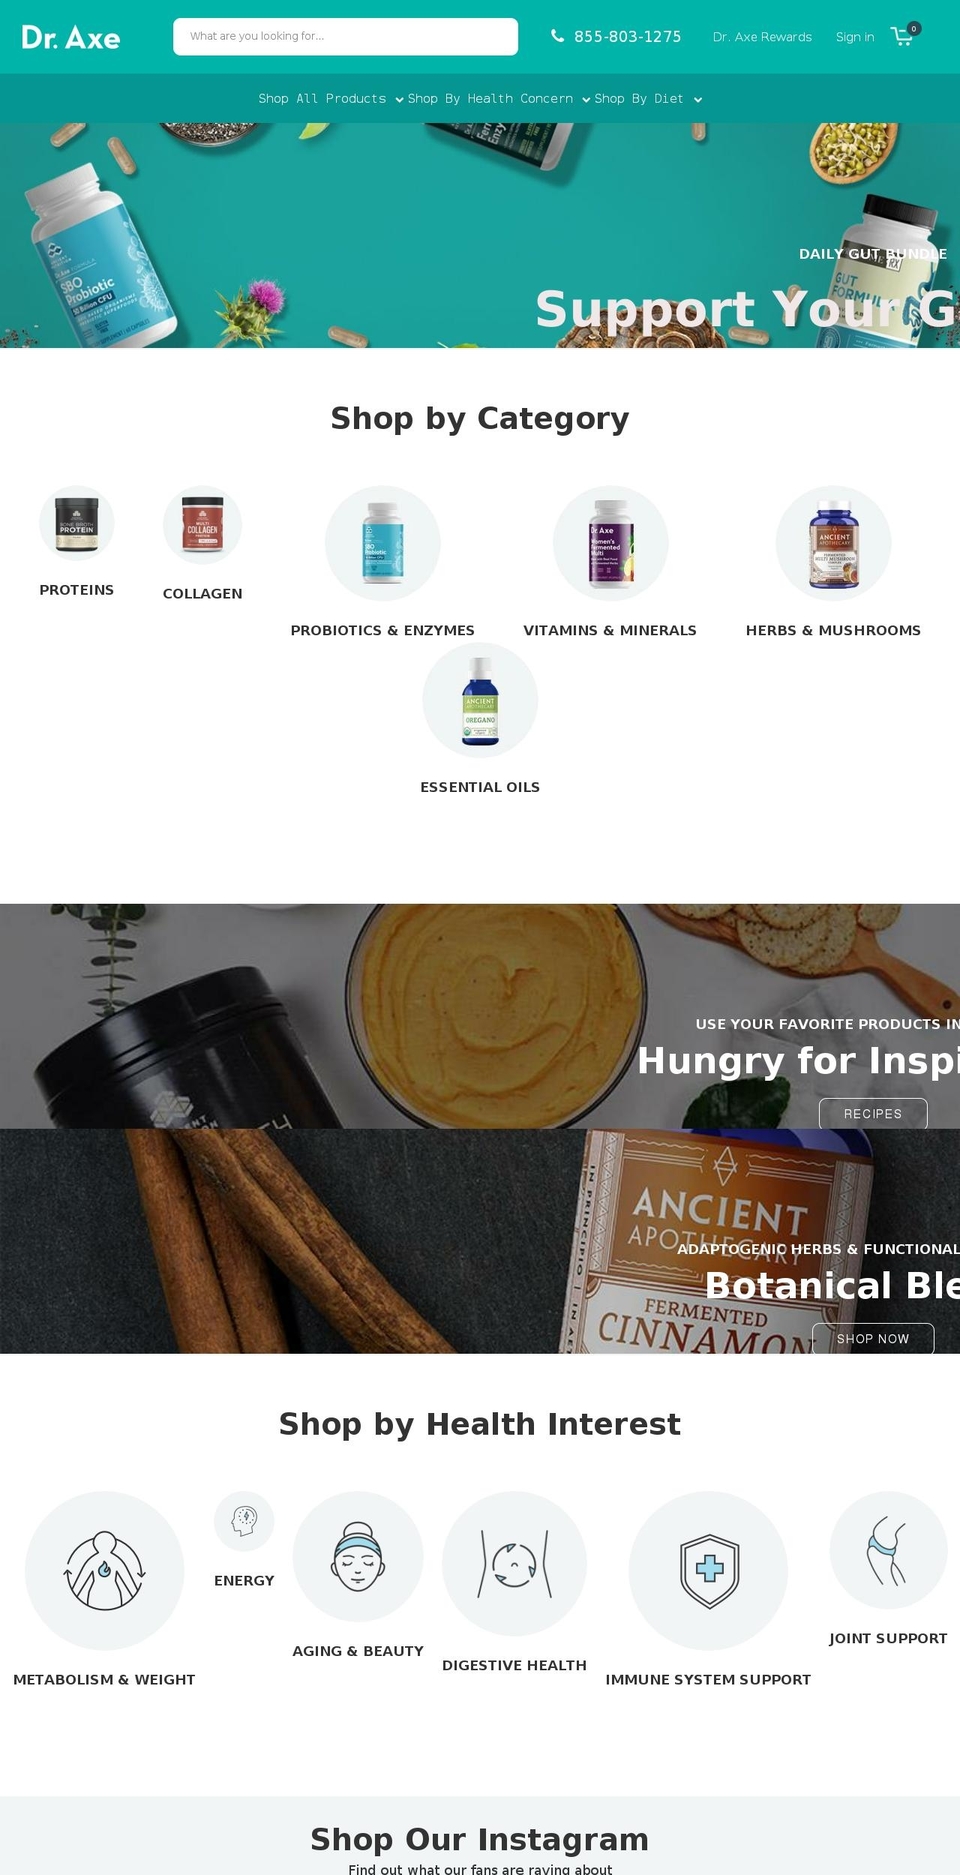 10571147 | Hotfix Cart Styles for Rewards | 8-8-18 Shopify theme site example therealfooddietcookbook.com